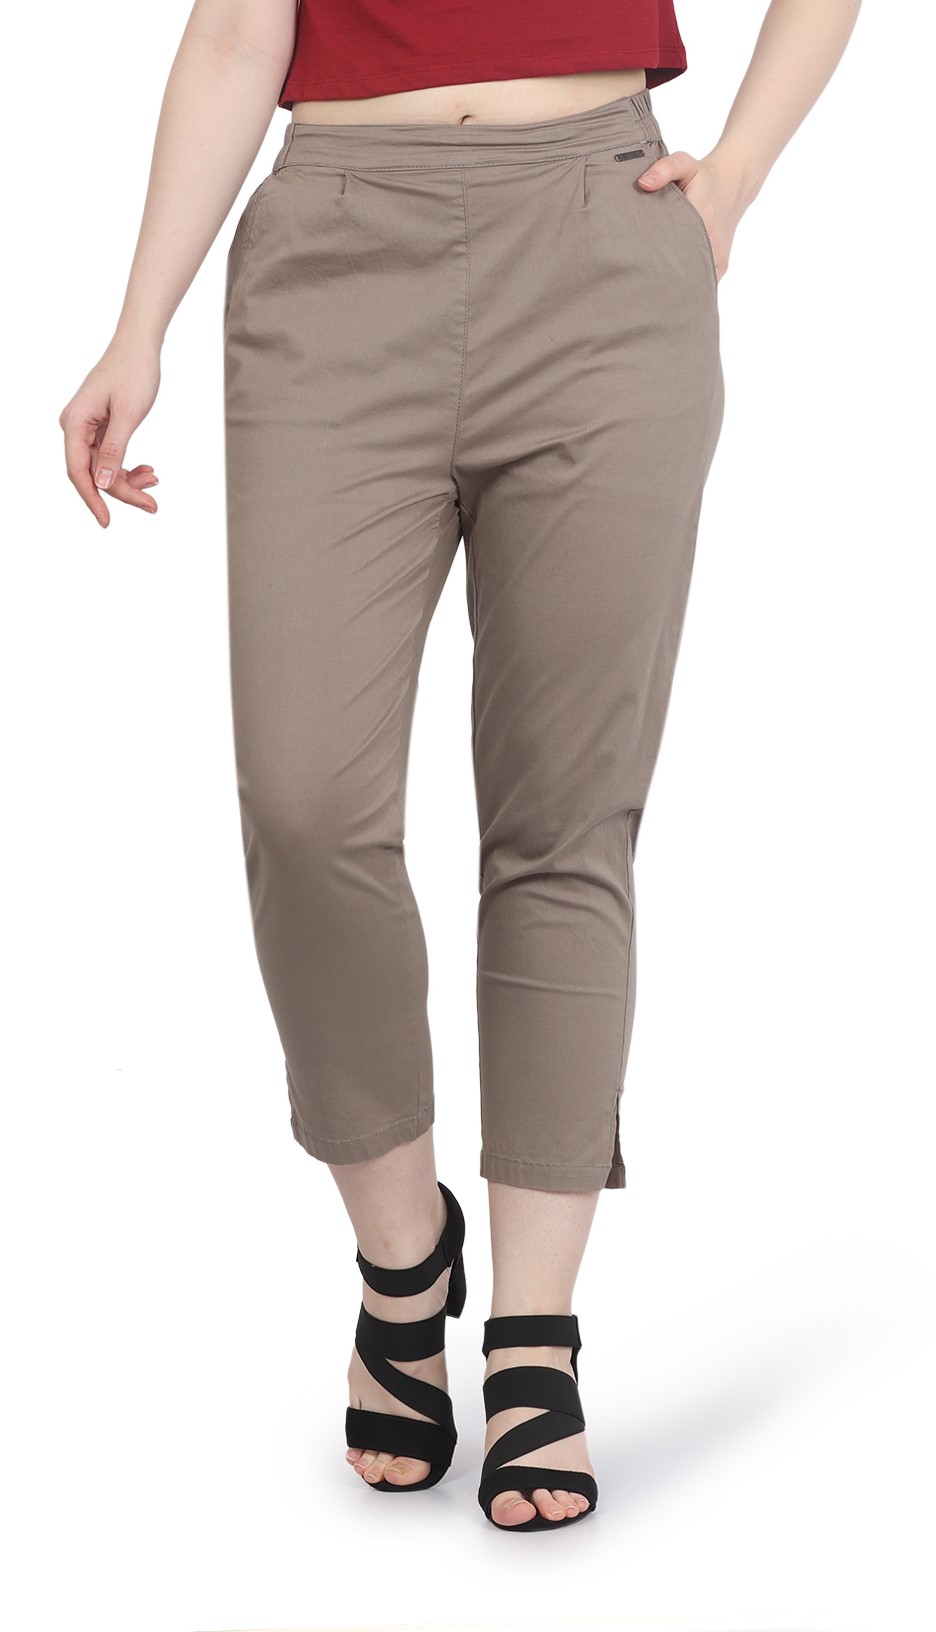 Buy Peach and Red Combo of 2 Ankle Length Pant Rayon for Best Price,  Reviews, Free Shipping